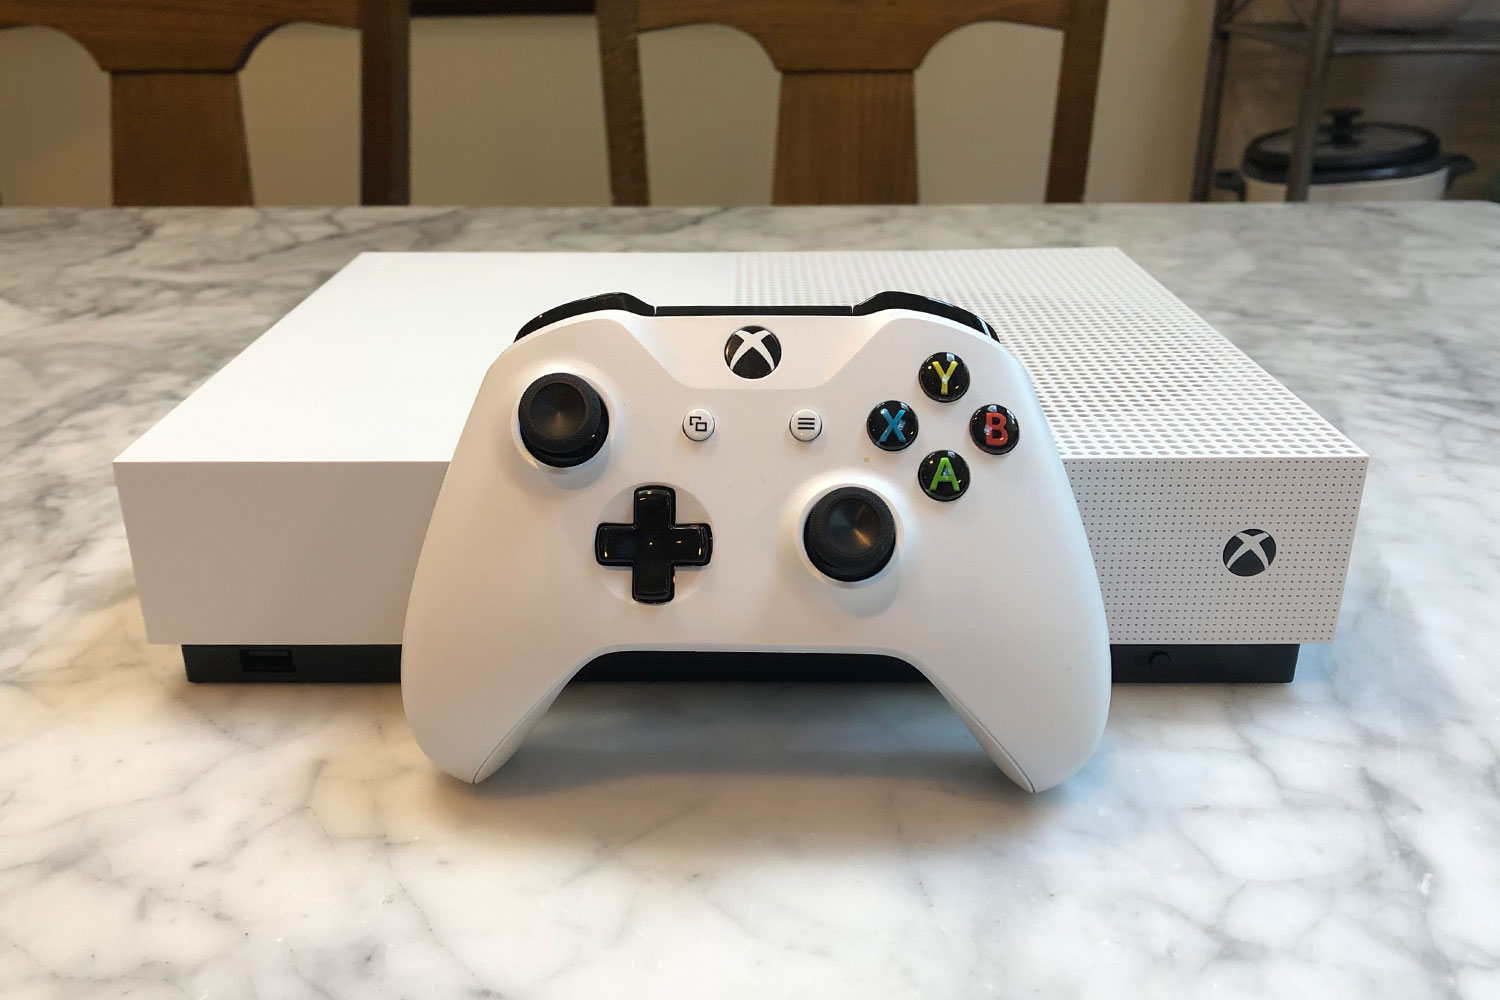 https://www.digitaltrends.com/wp-content/uploads/2019/09/xbox-one-s-all-digital-edition-review-4.jpg?p=1